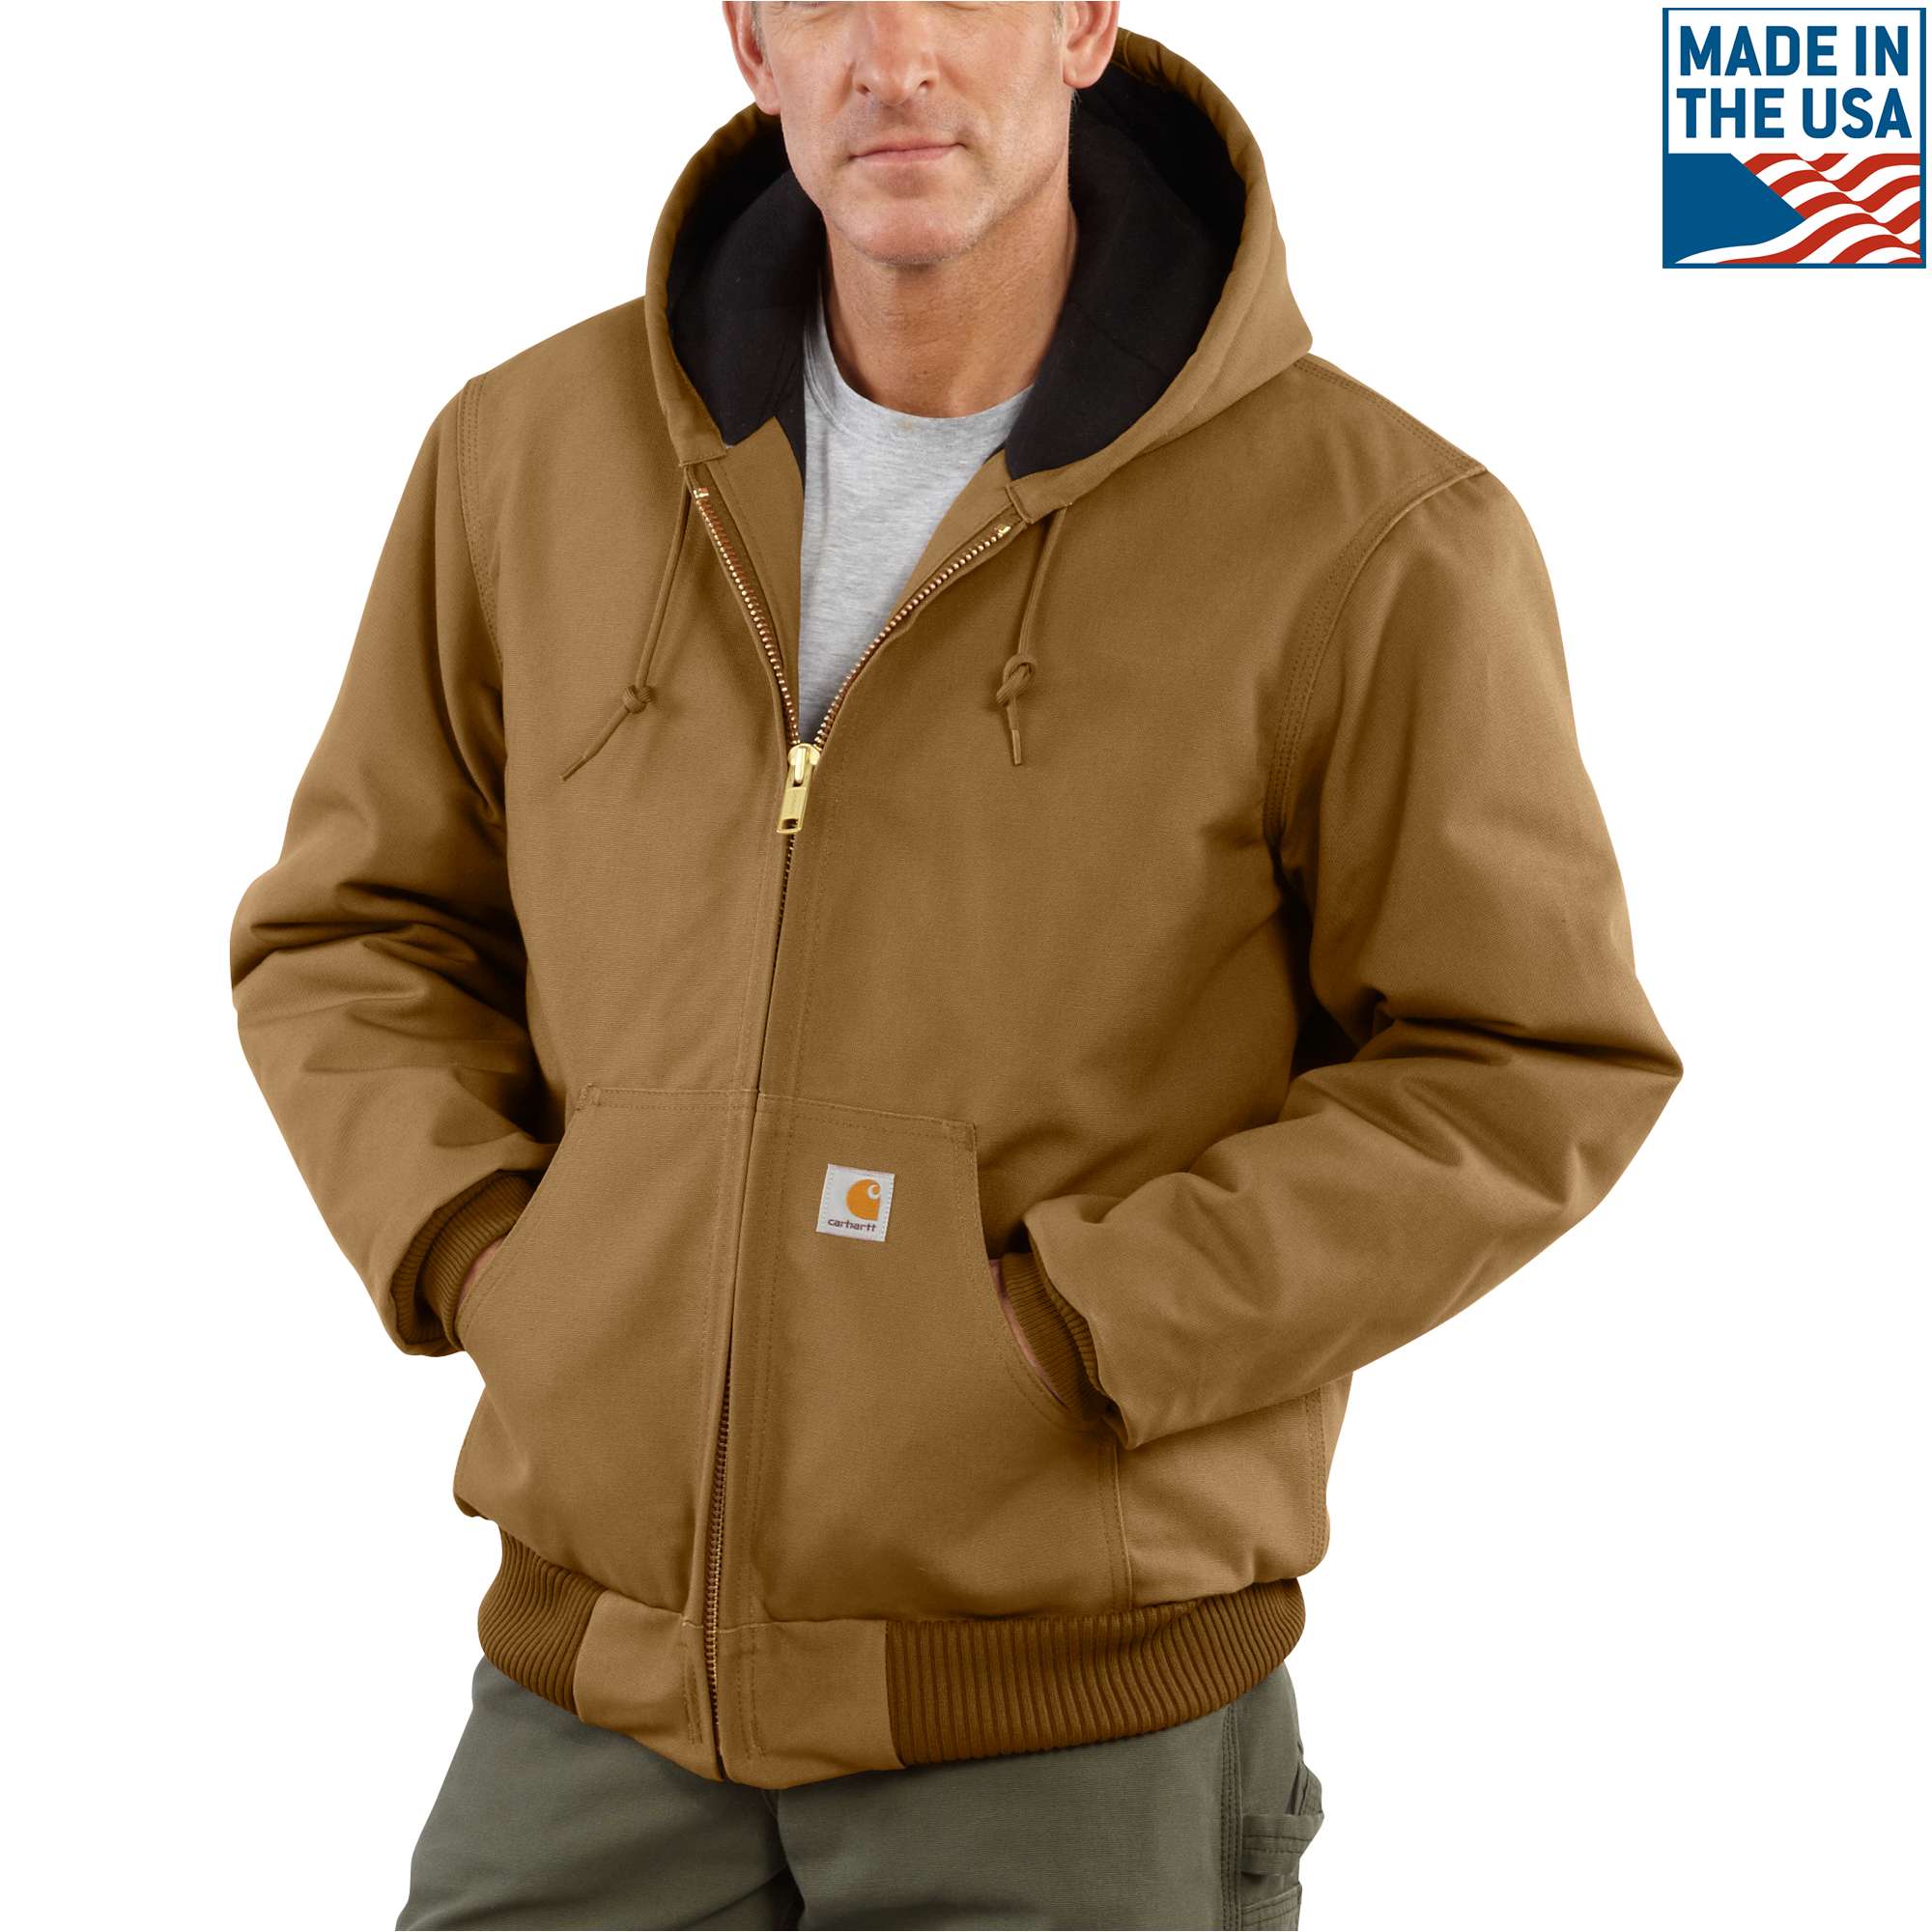 Men's Ultra-Soft Duck Jacket, Cotton & Fleece Lining for Cold